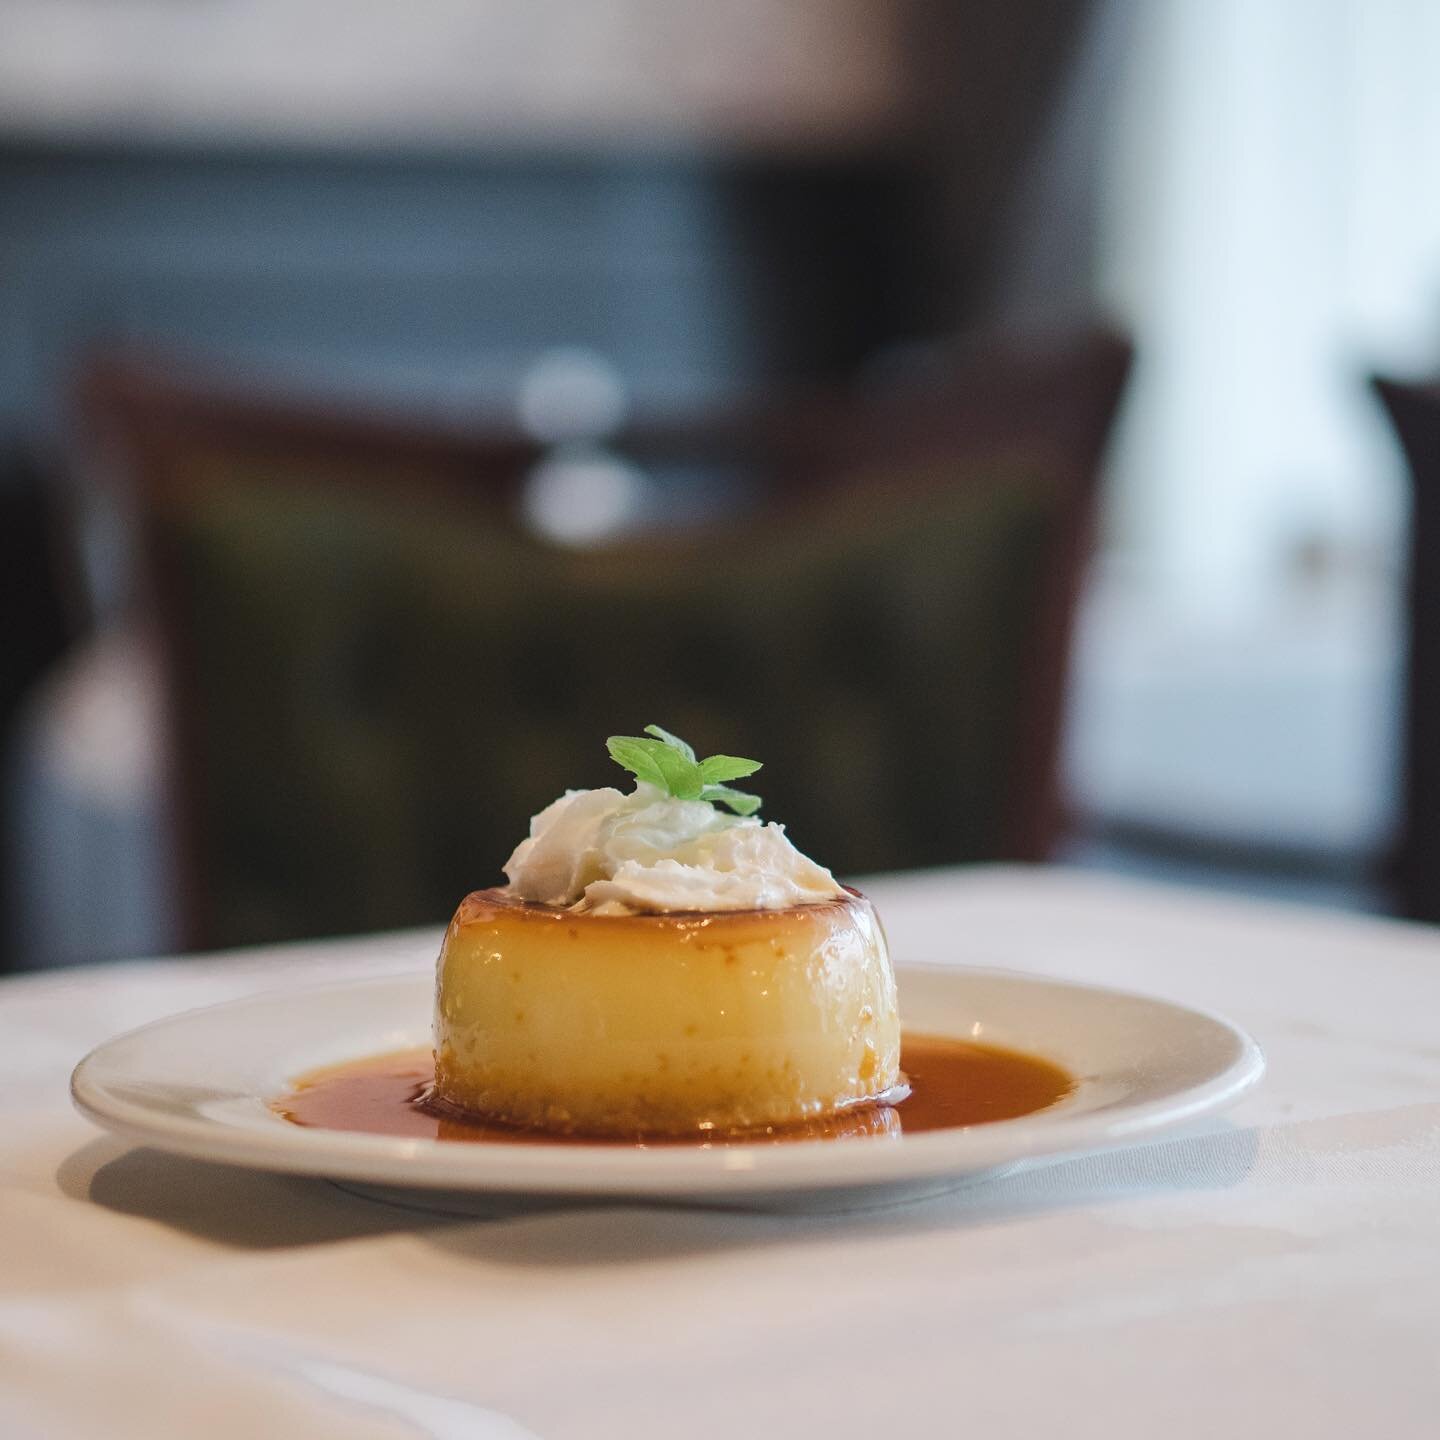 Treat yourself with our delicious creme caramel, one of our many desserts to choose from! #novaeuropa